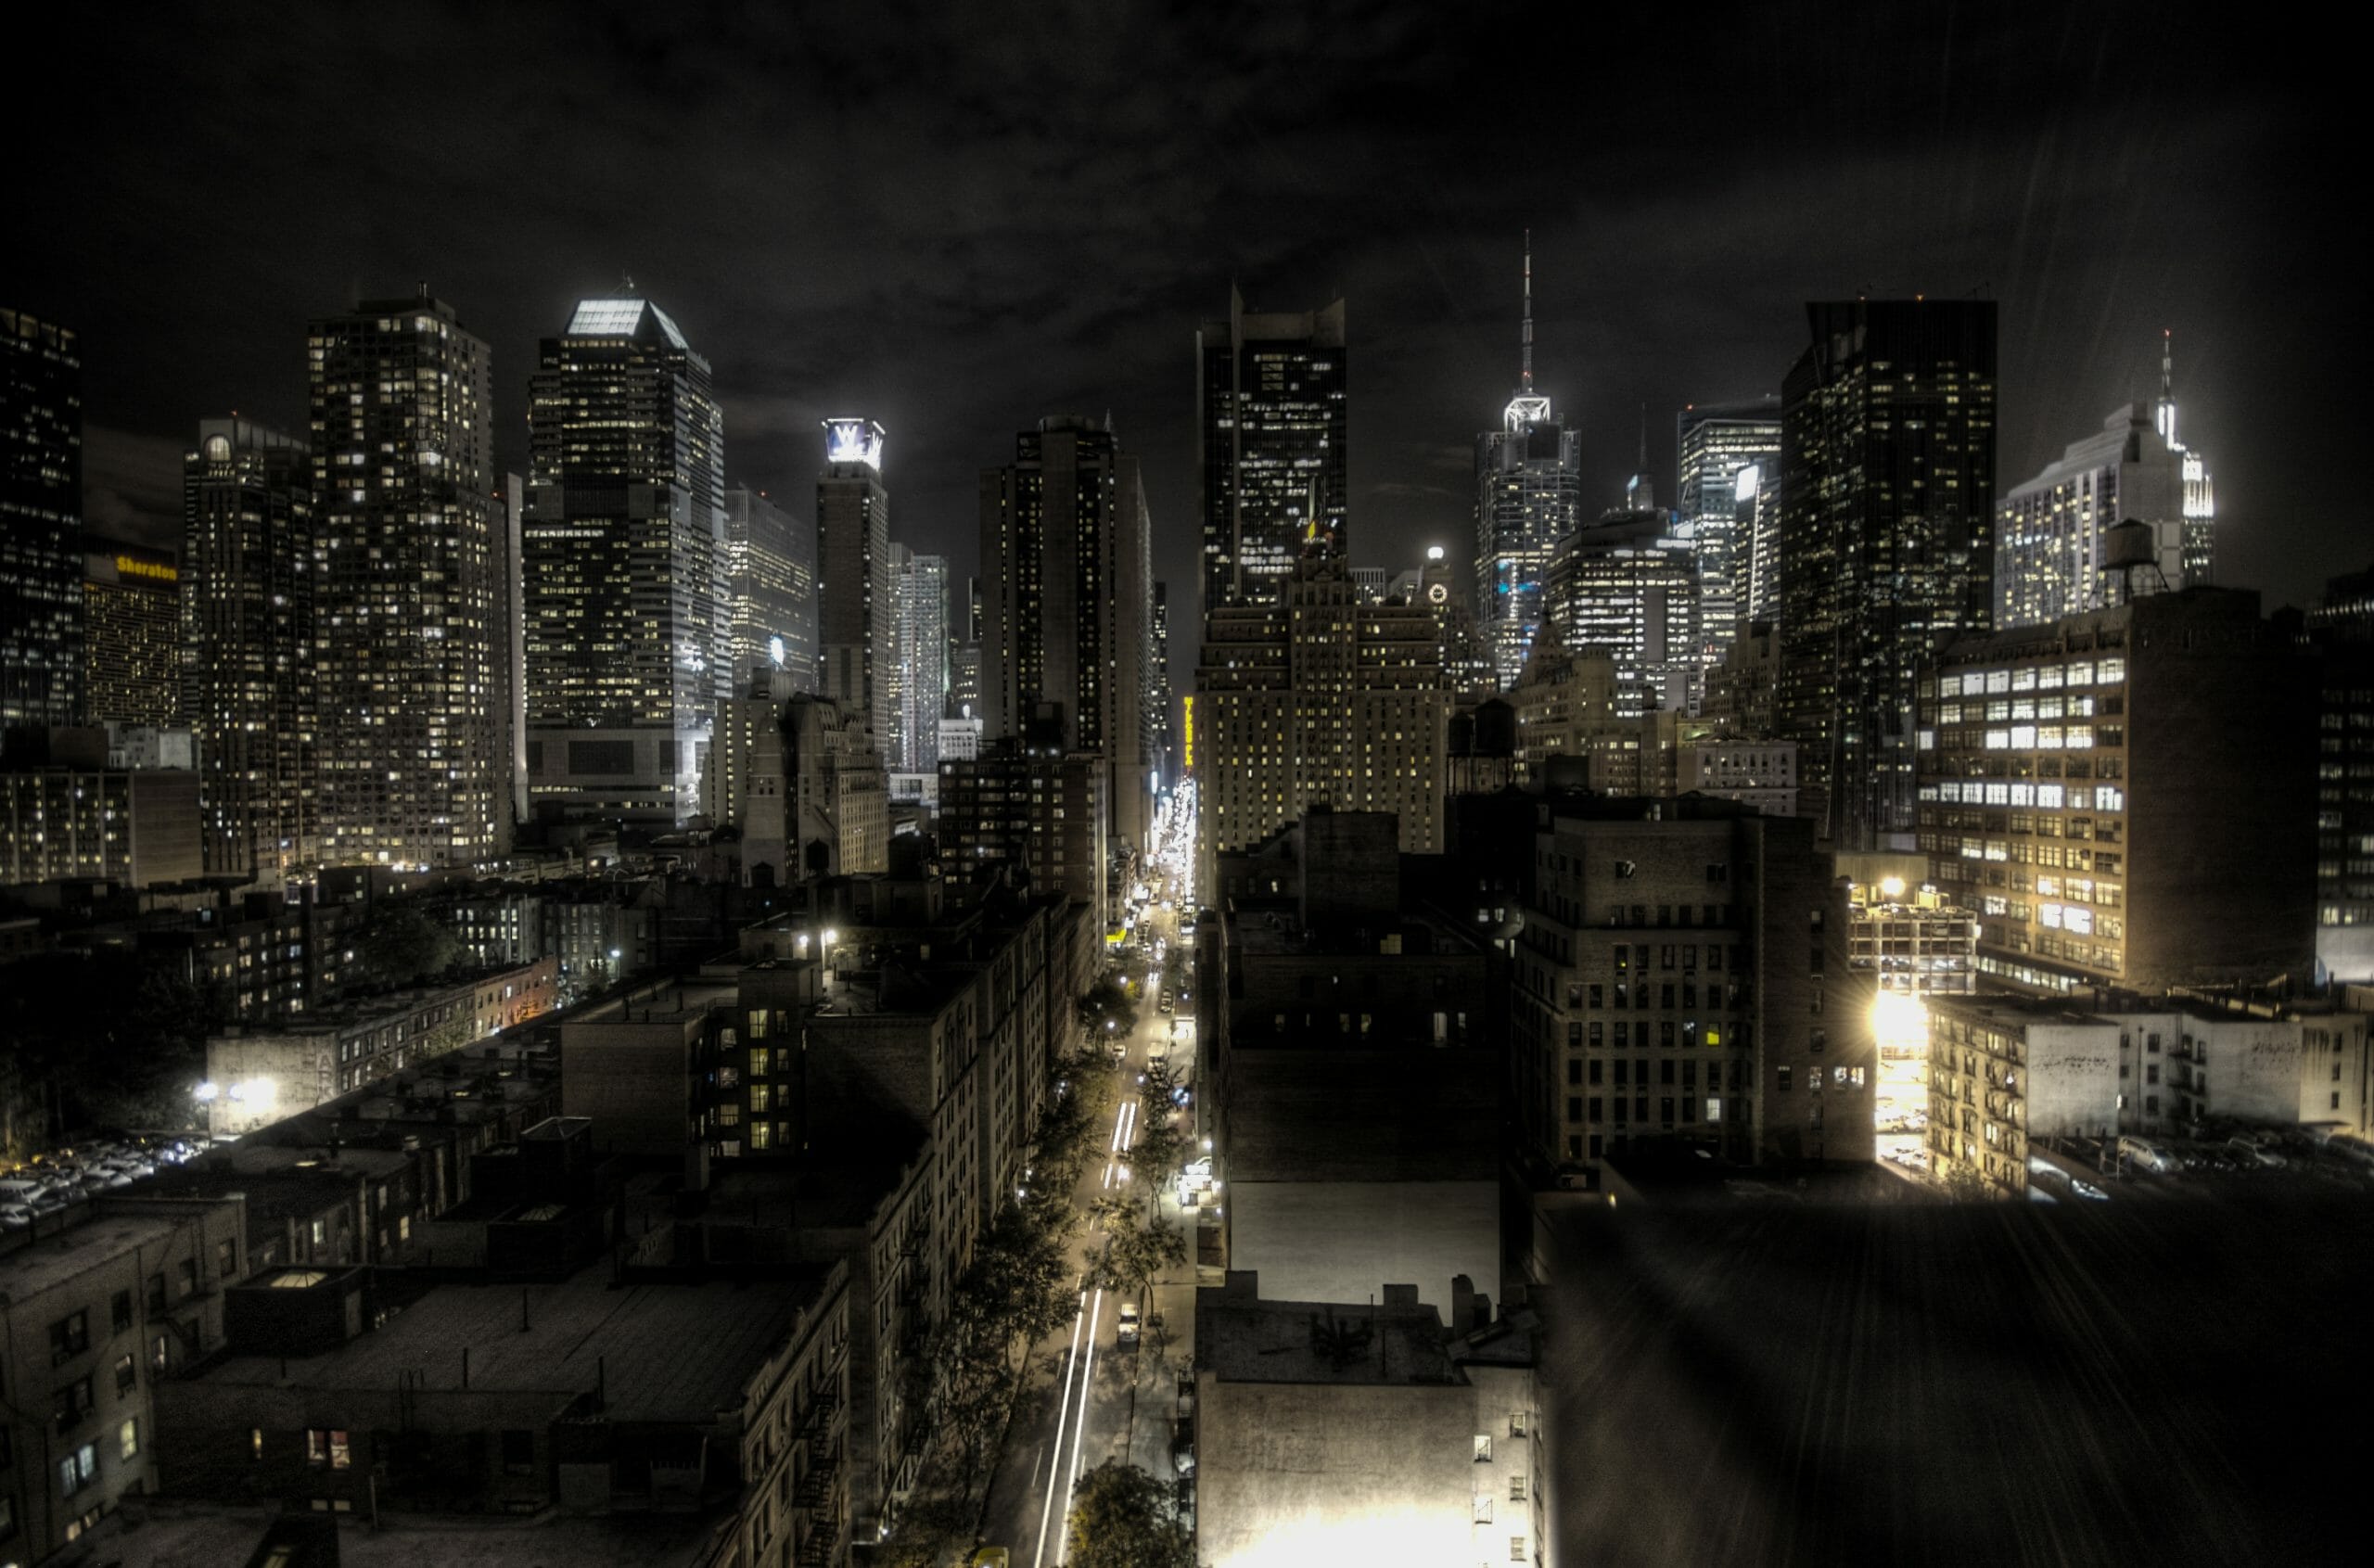 New York City at night HDR.jpg From Wikimedia Commons, the free media repository